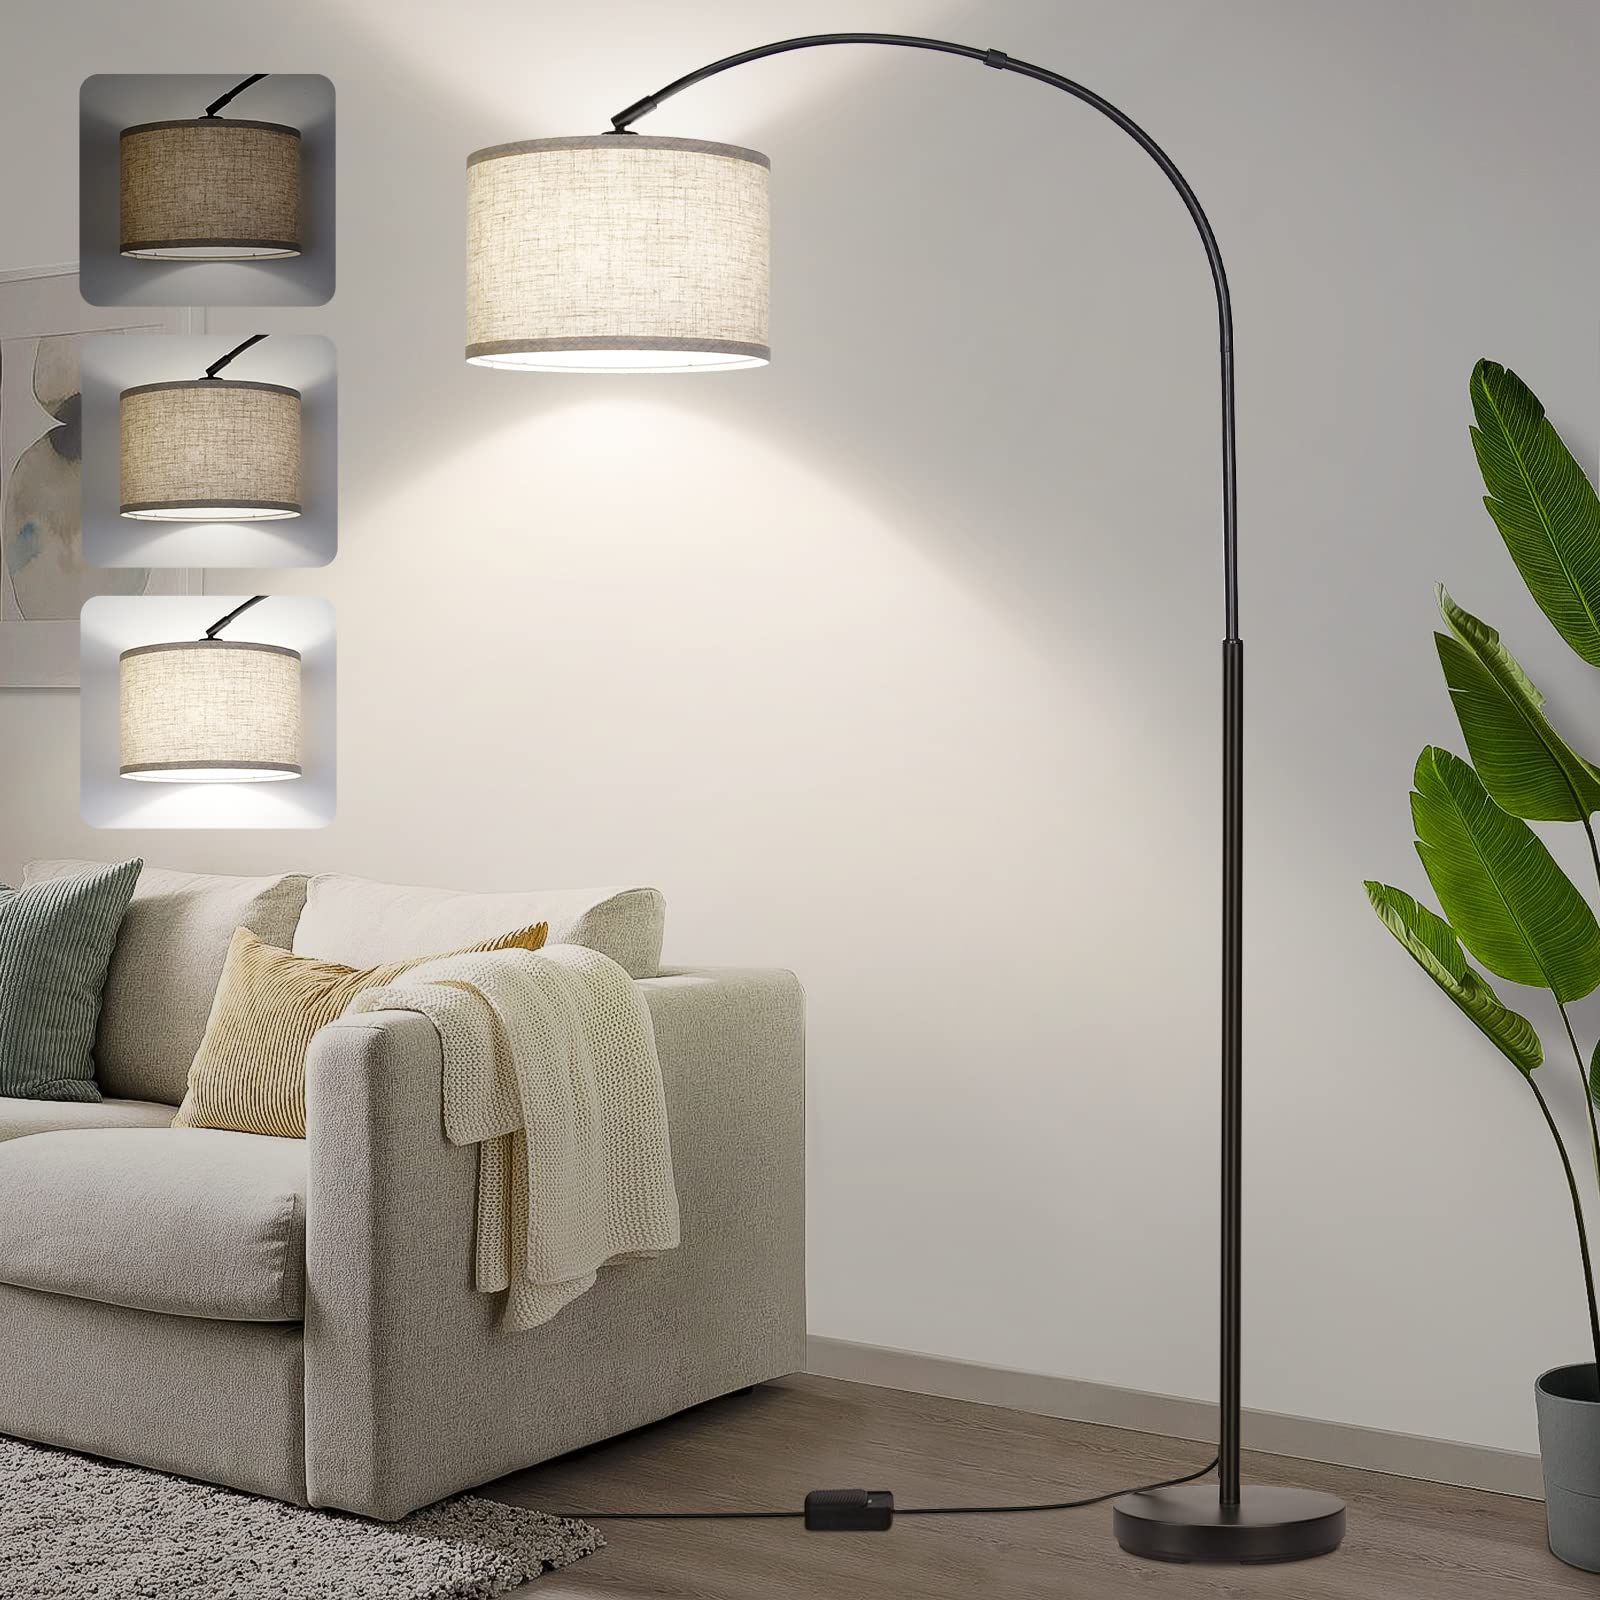 Dimmable Floor Lamp, Arc Floor Lamp With Dimmer, Black Standing Lamp With  Adjustable Hanging Shade, Over For Well Known Arc Standing Lamps (View 15 of 15)